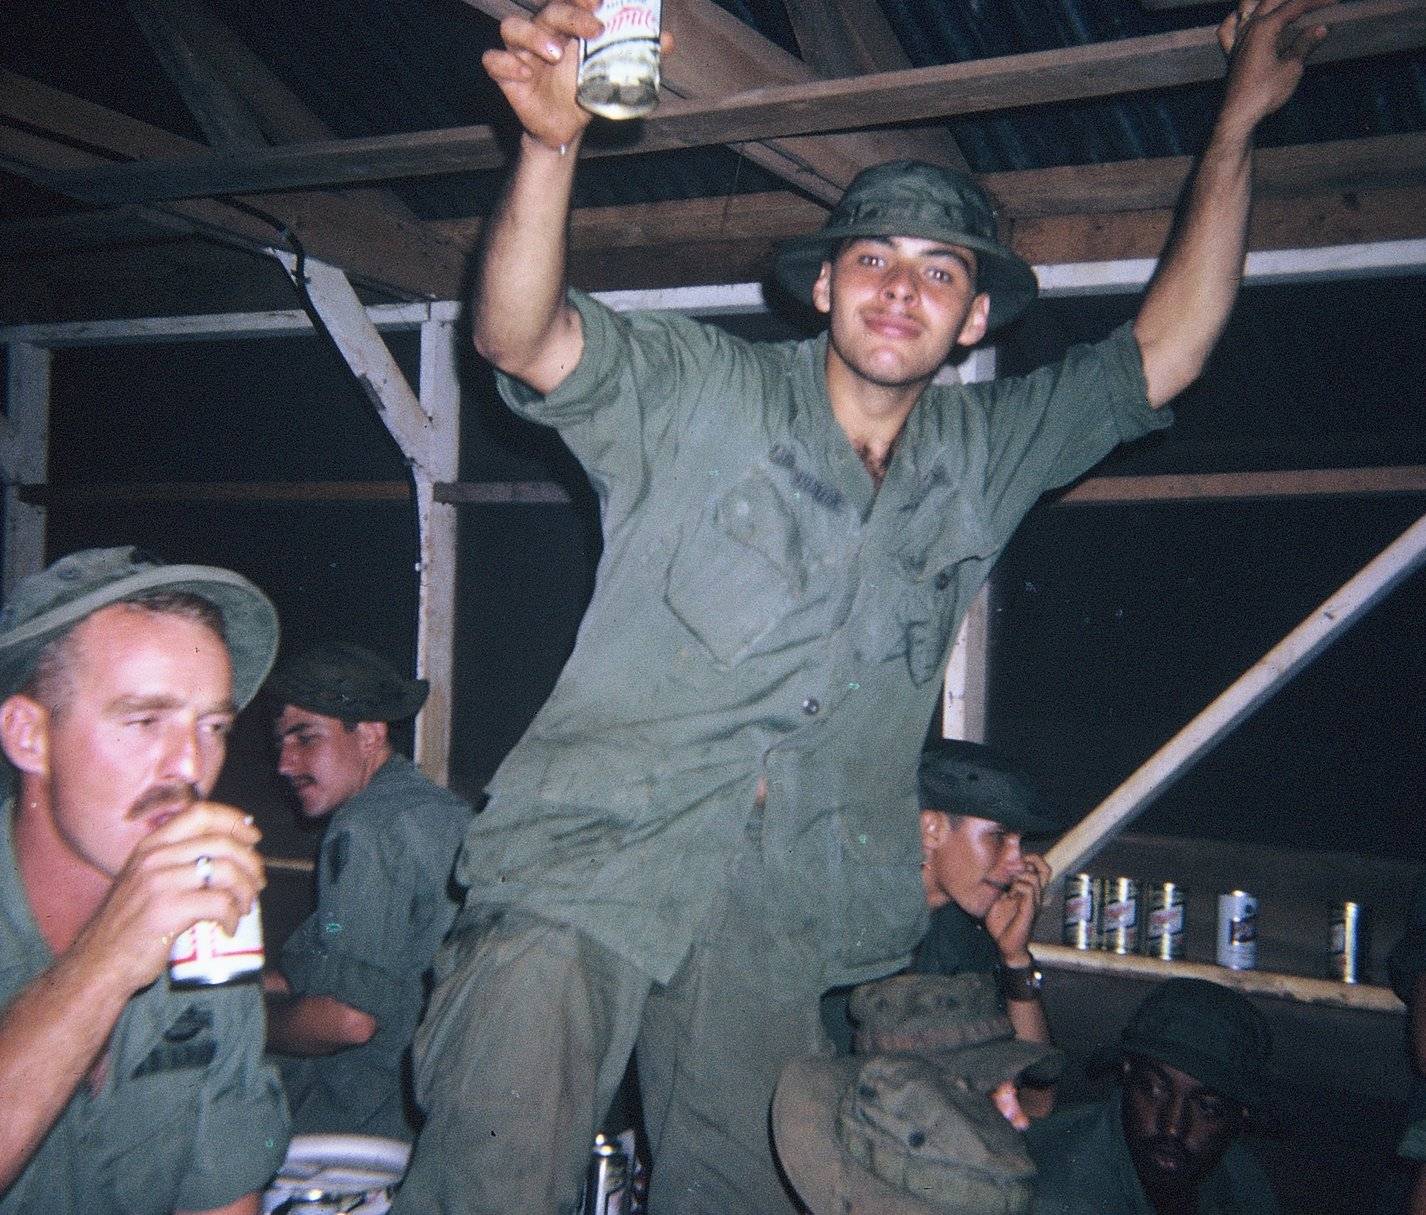 Group of soldiers drinking cans of beer at nighttime.